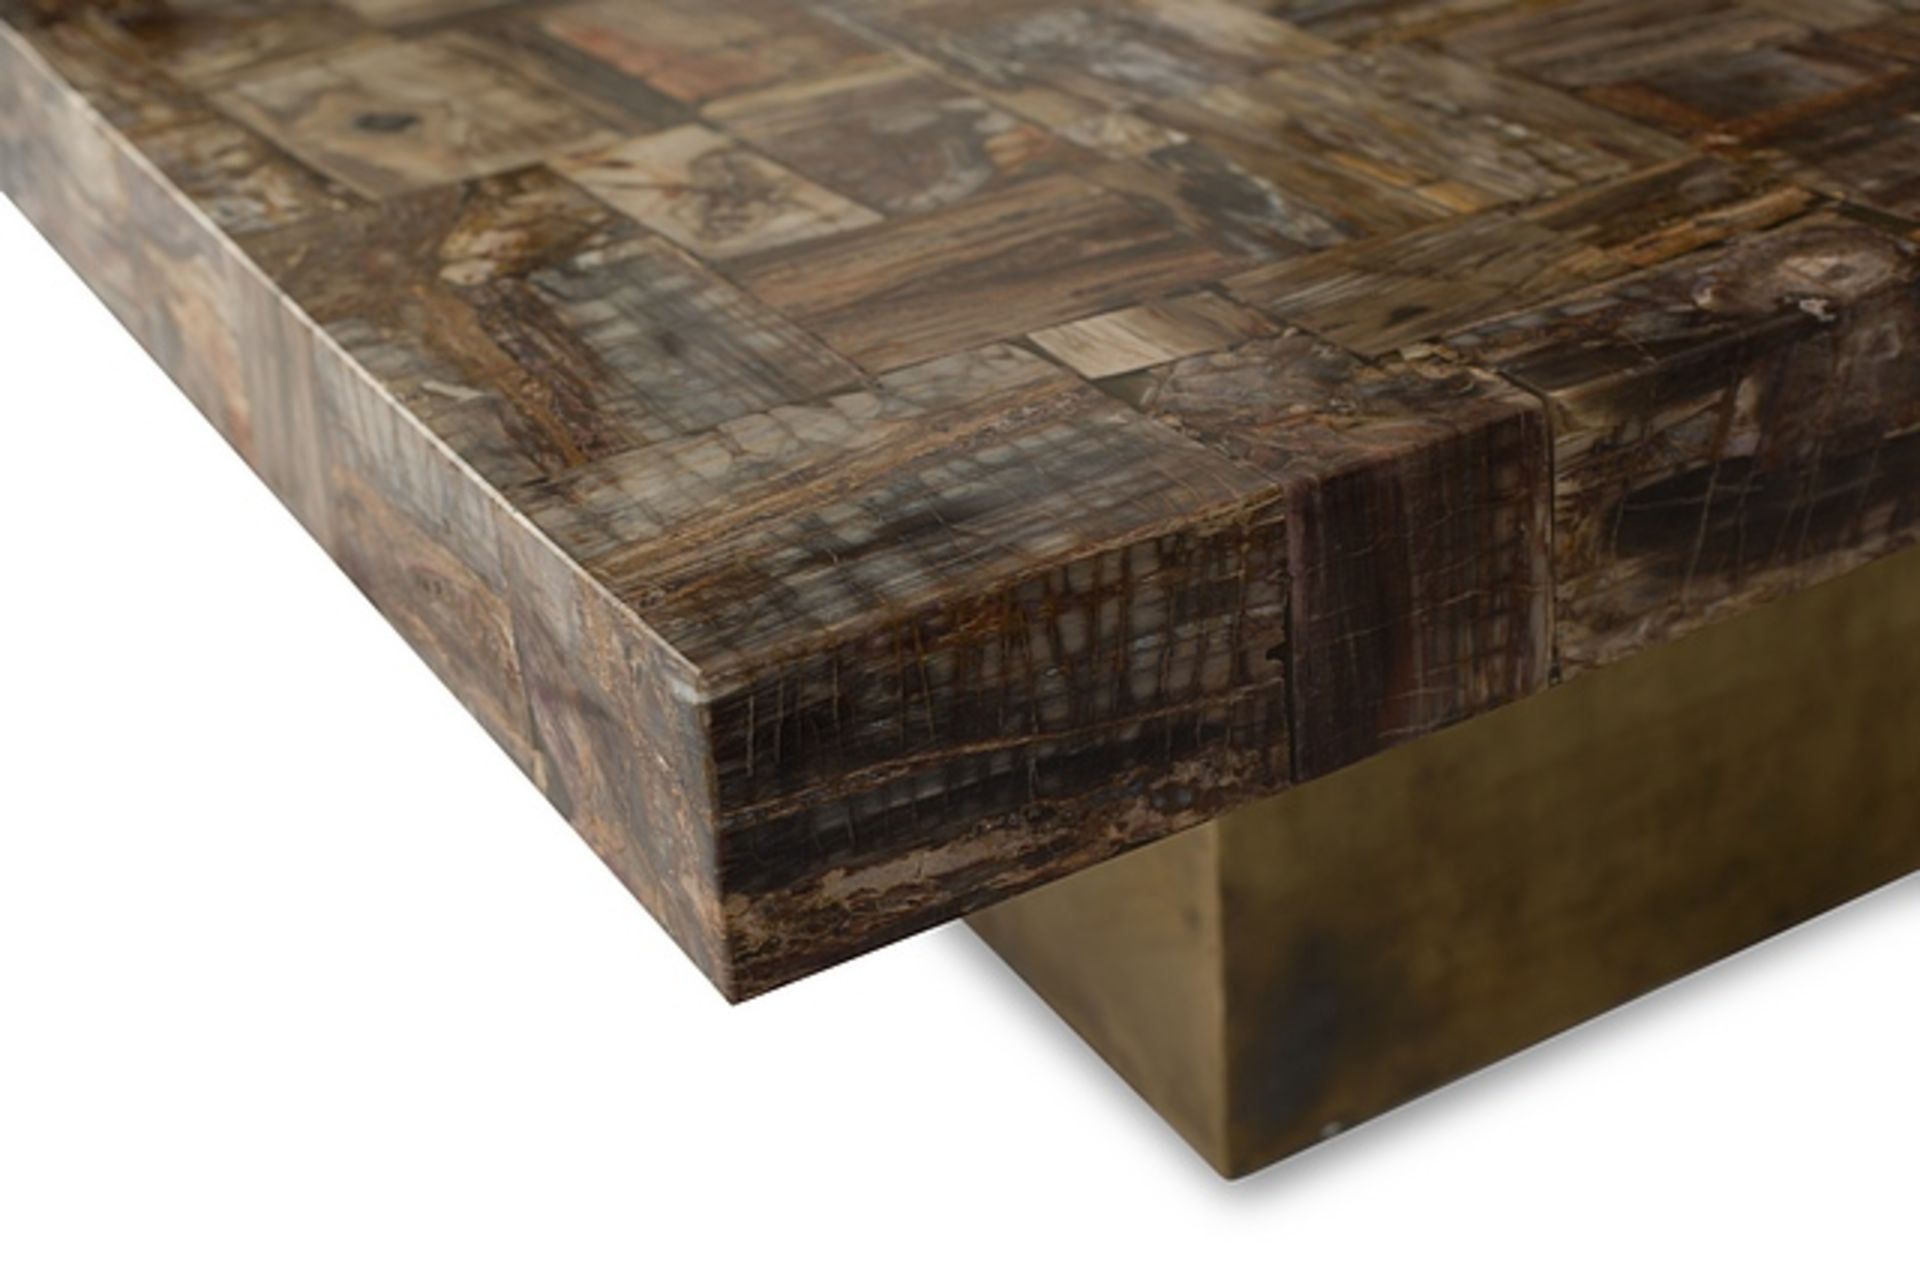 Coffee Table contemporary style, large rectangular low level petrified wood table with textured matt - Image 5 of 7